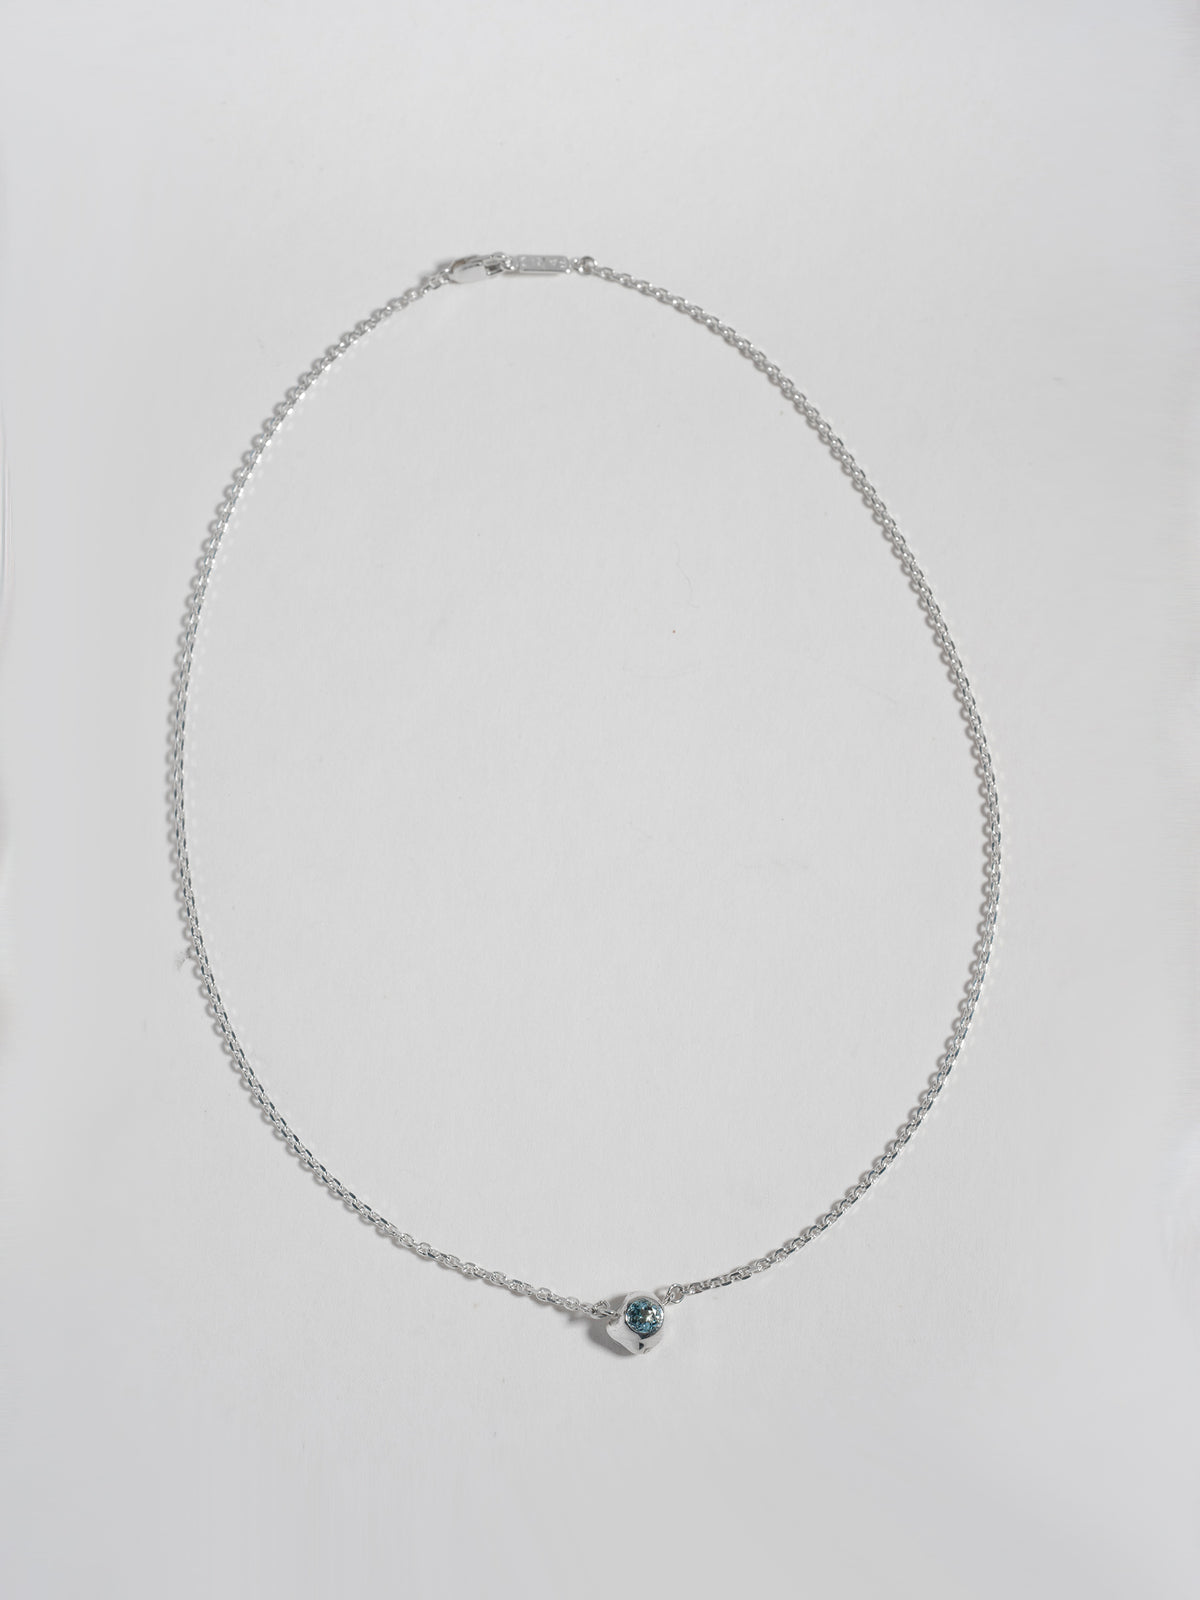 Product image of FARIS KIRA Necklace in sterling silver with topaz, full product shown on white background, front view